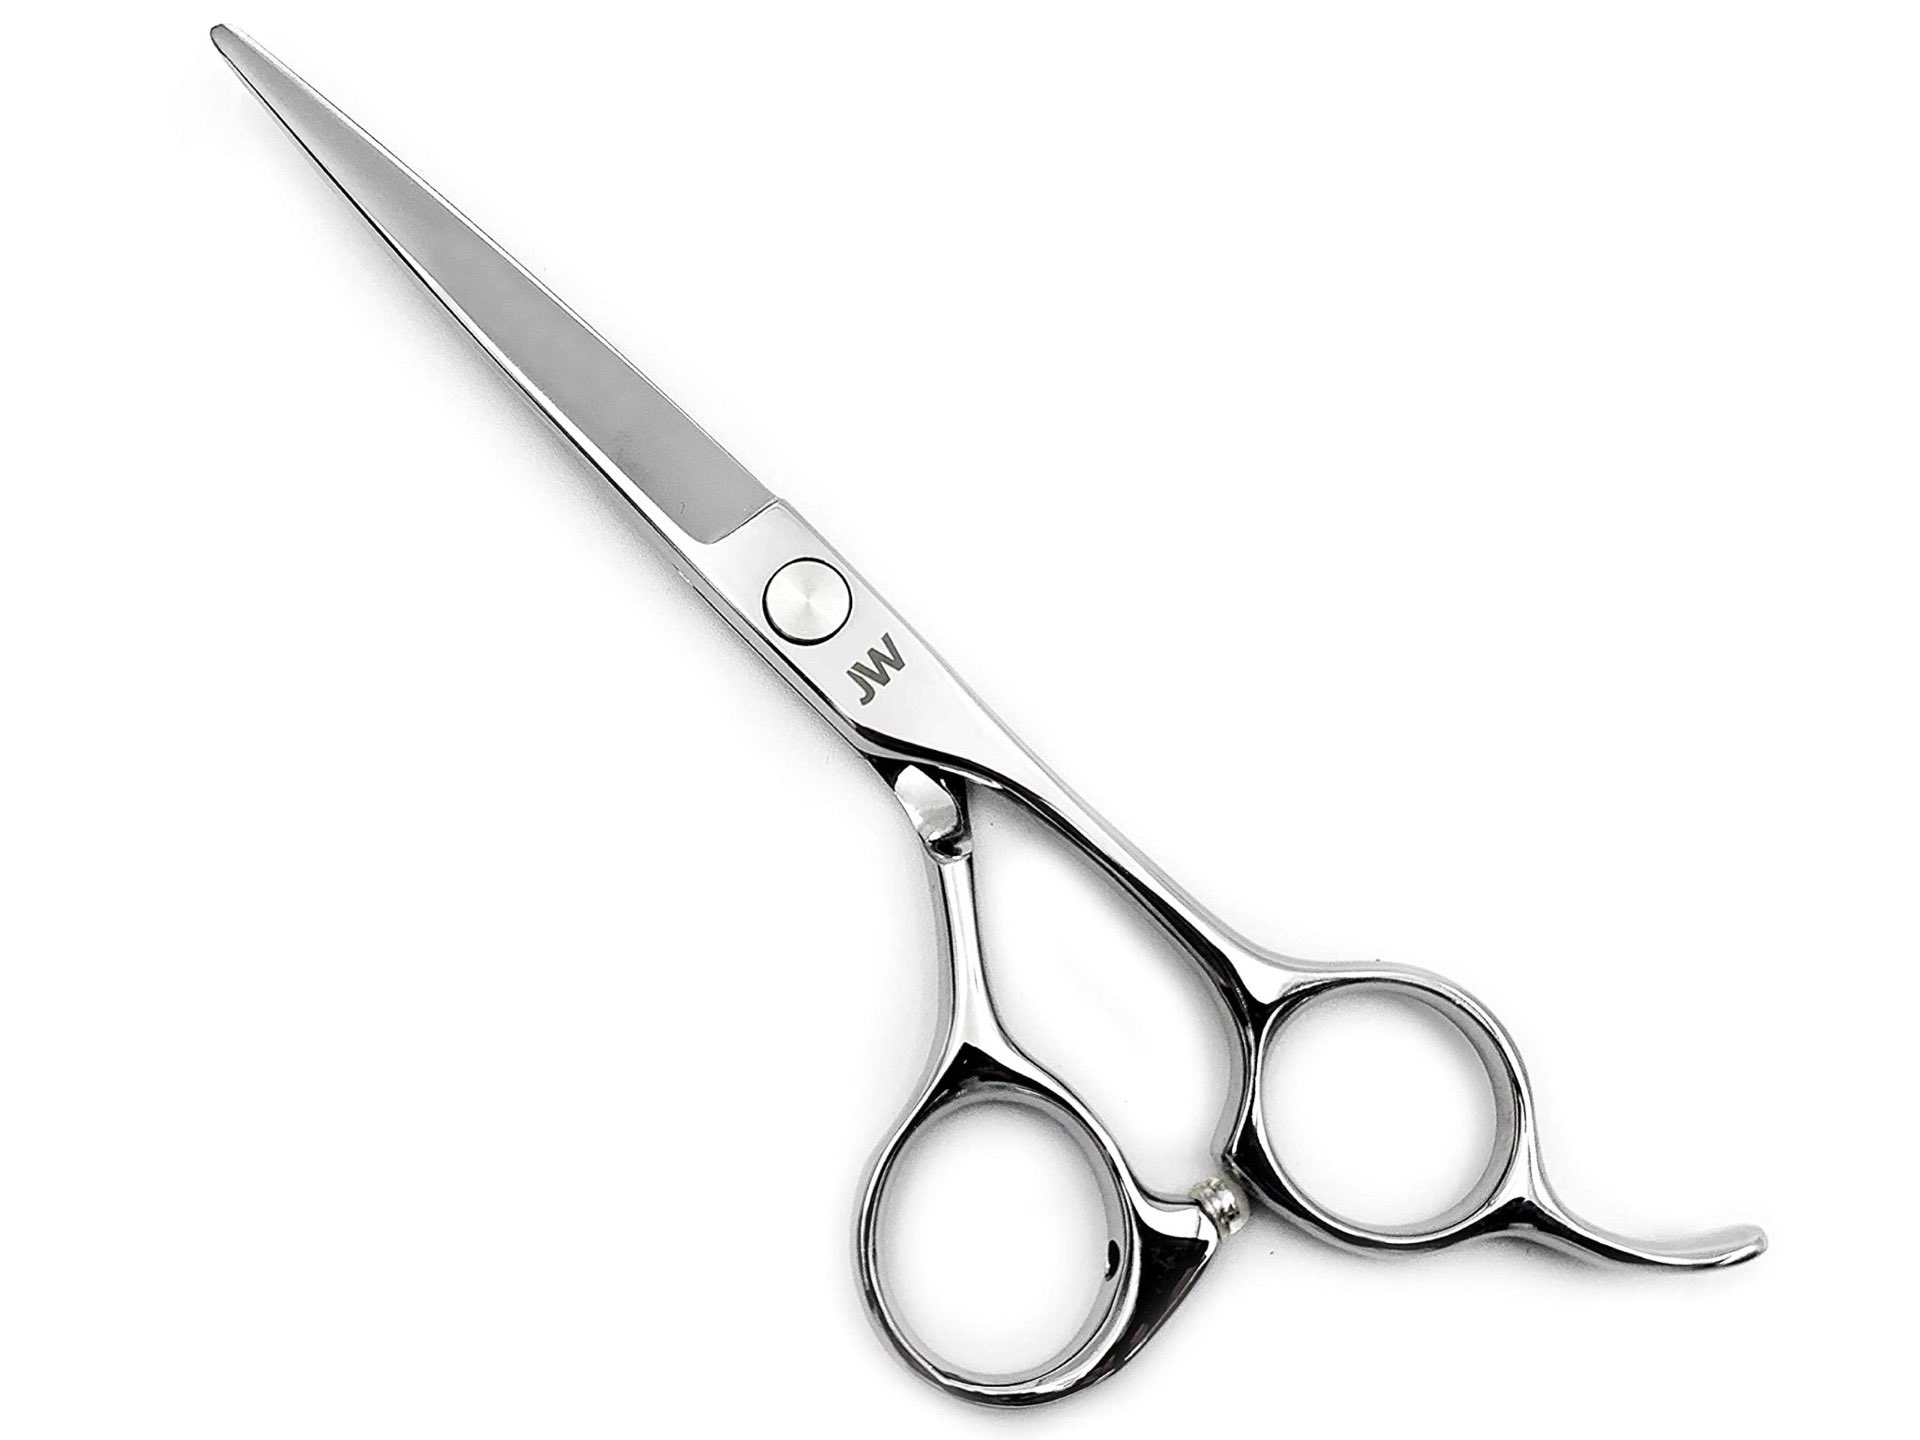 JW Shears Professional Hair-Cutting Scissors — Tools and Toys